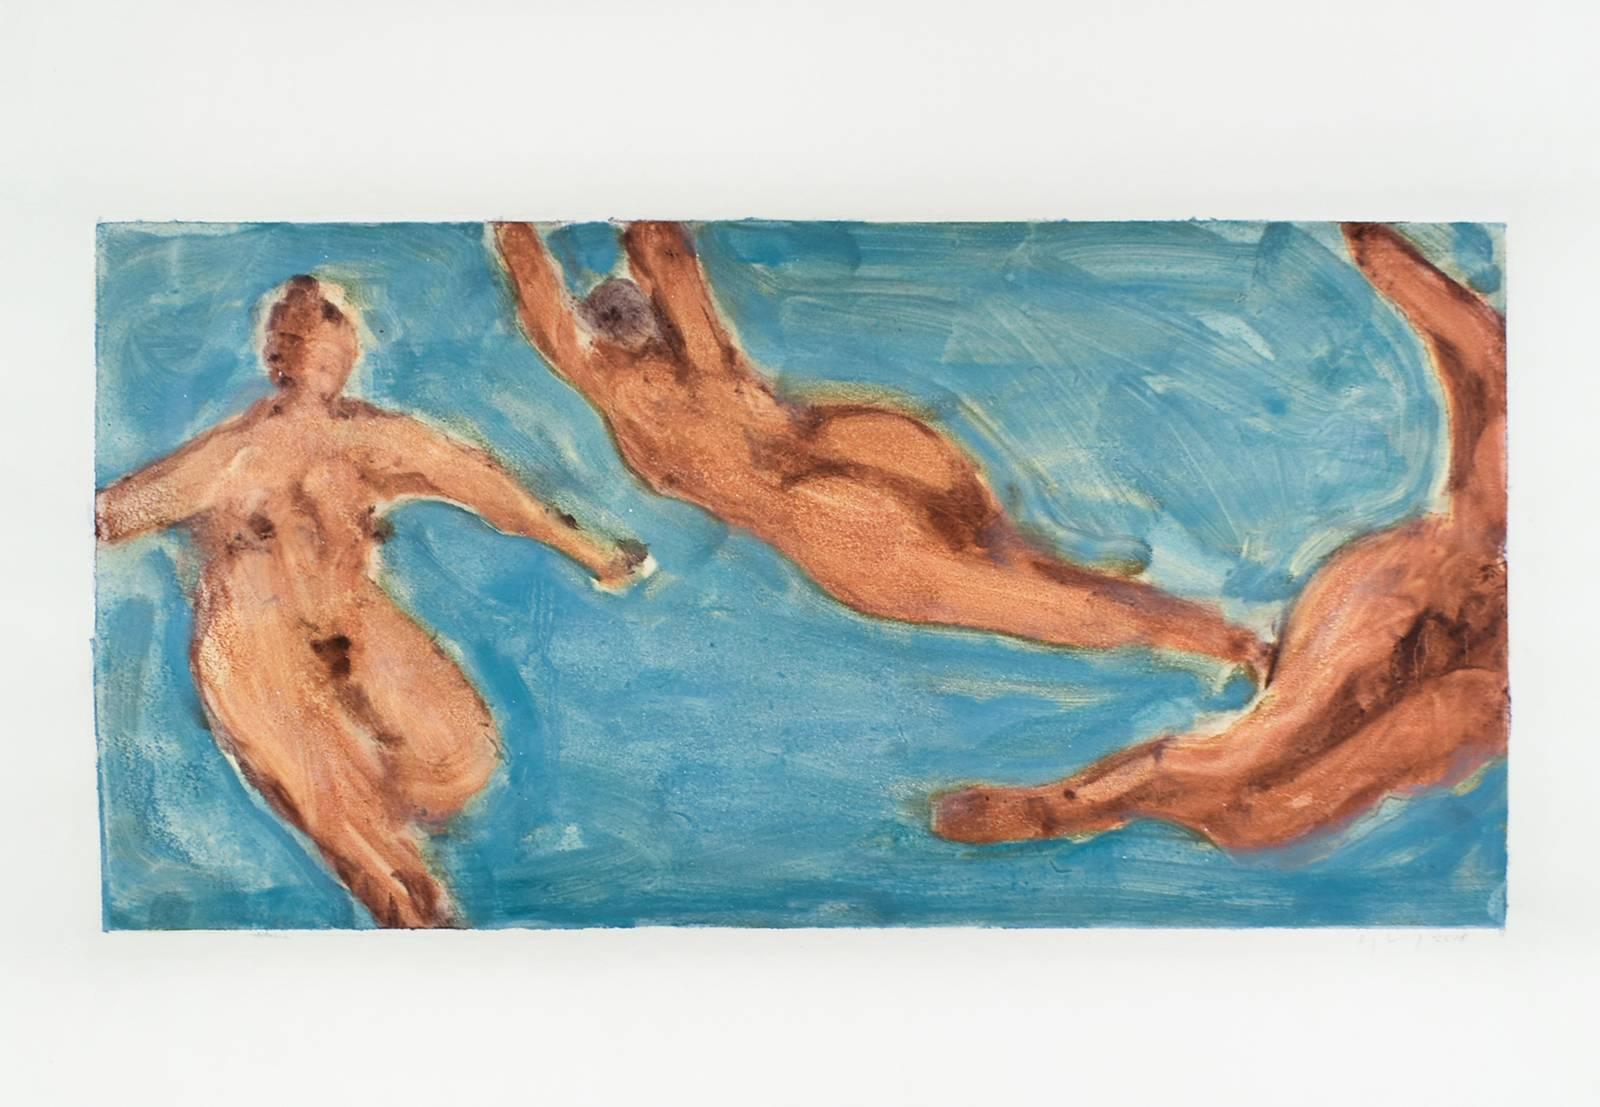 Swimmers (Abstracted Figurative Monotype of Nude Women in Aqua Blue Water) - Print by David Konigsberg